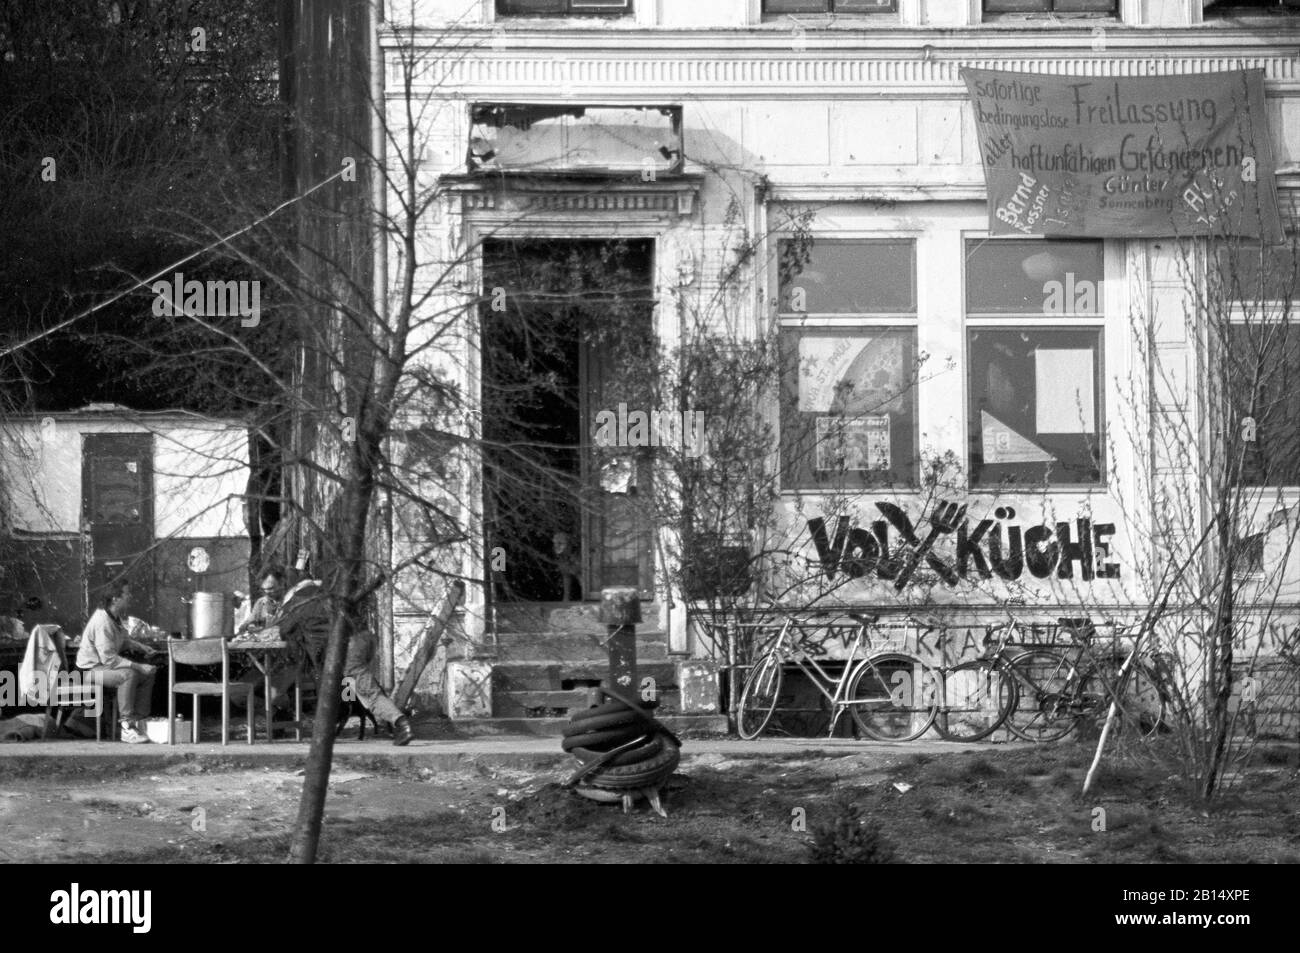 The Volksküche, or People's Kitchen, hippie hangout and cooperative on St. Pauli Hafenstraße, Hamburg, Germany, circa 1988.  Black and white film photograph Stock Photo